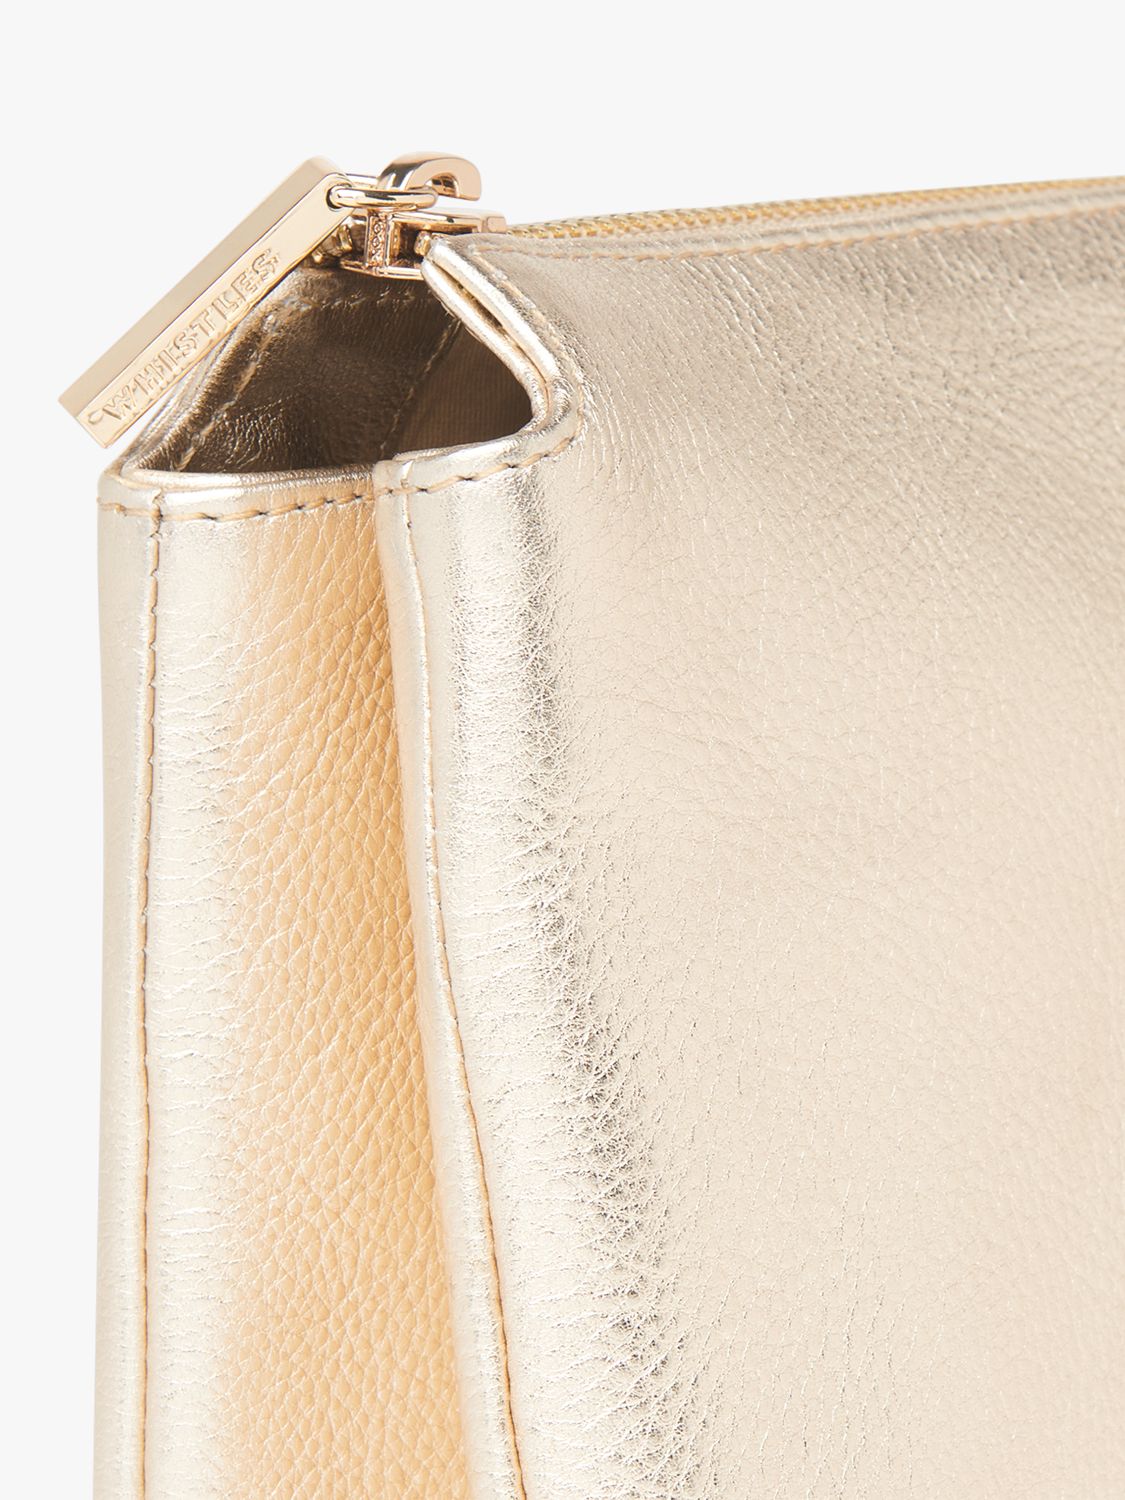 Whistles Elita Leather Double Pouch Clutch Bag, Gold